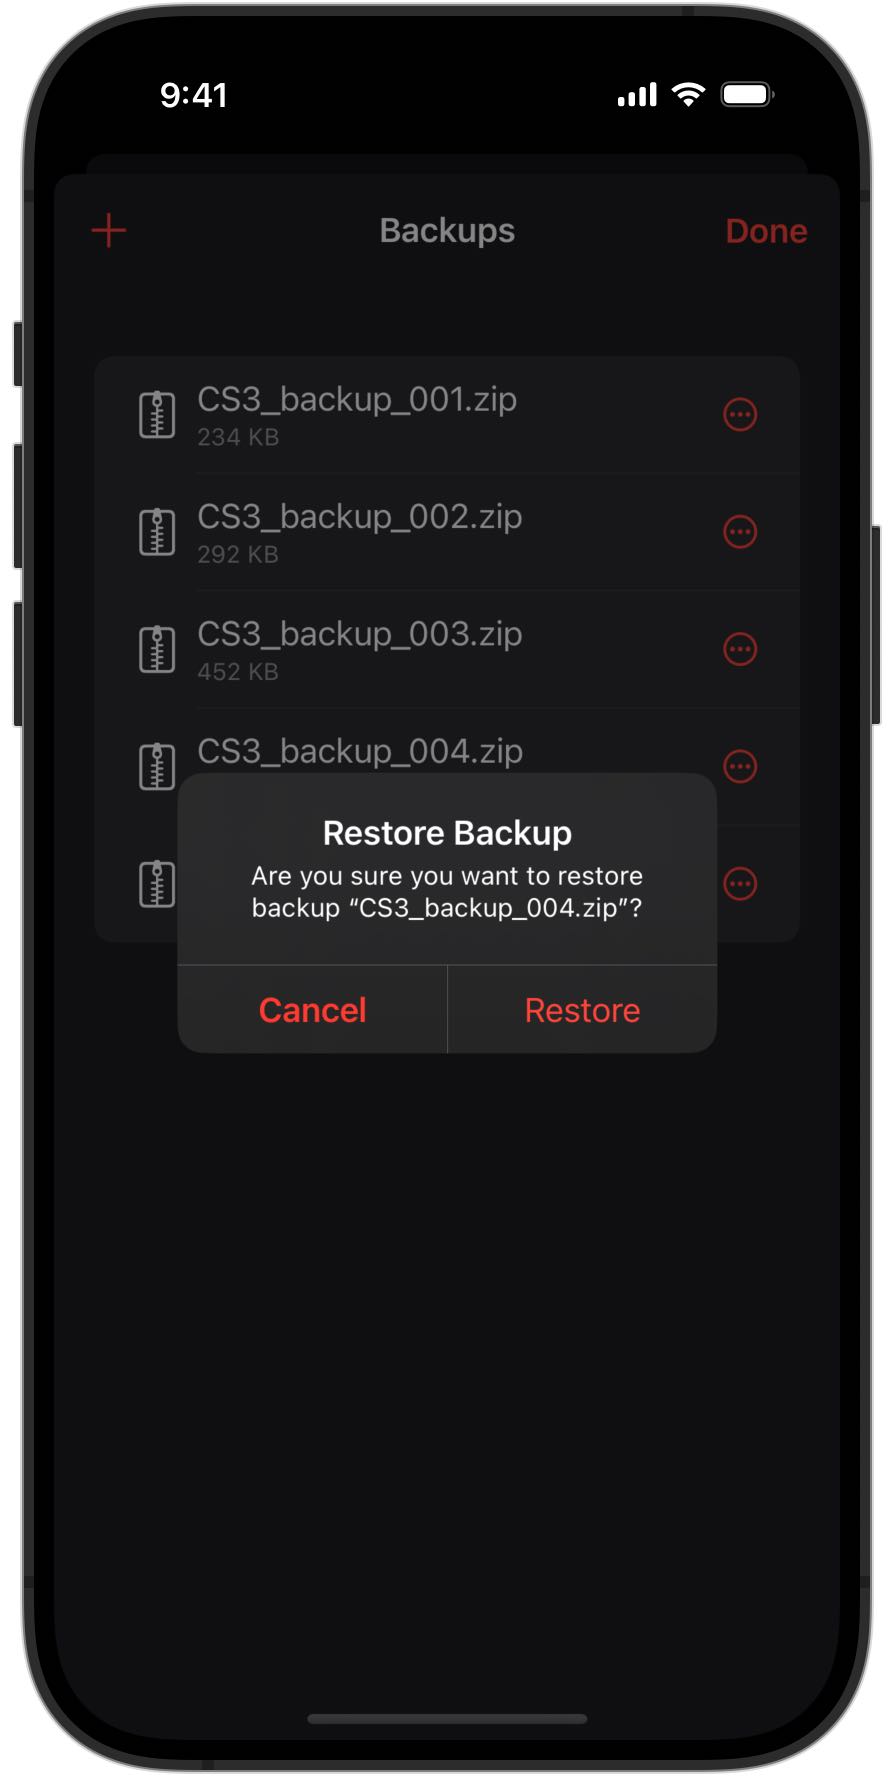 Screenshots of an iPhone asking confirmation before restoring a backup in RailControl Pro